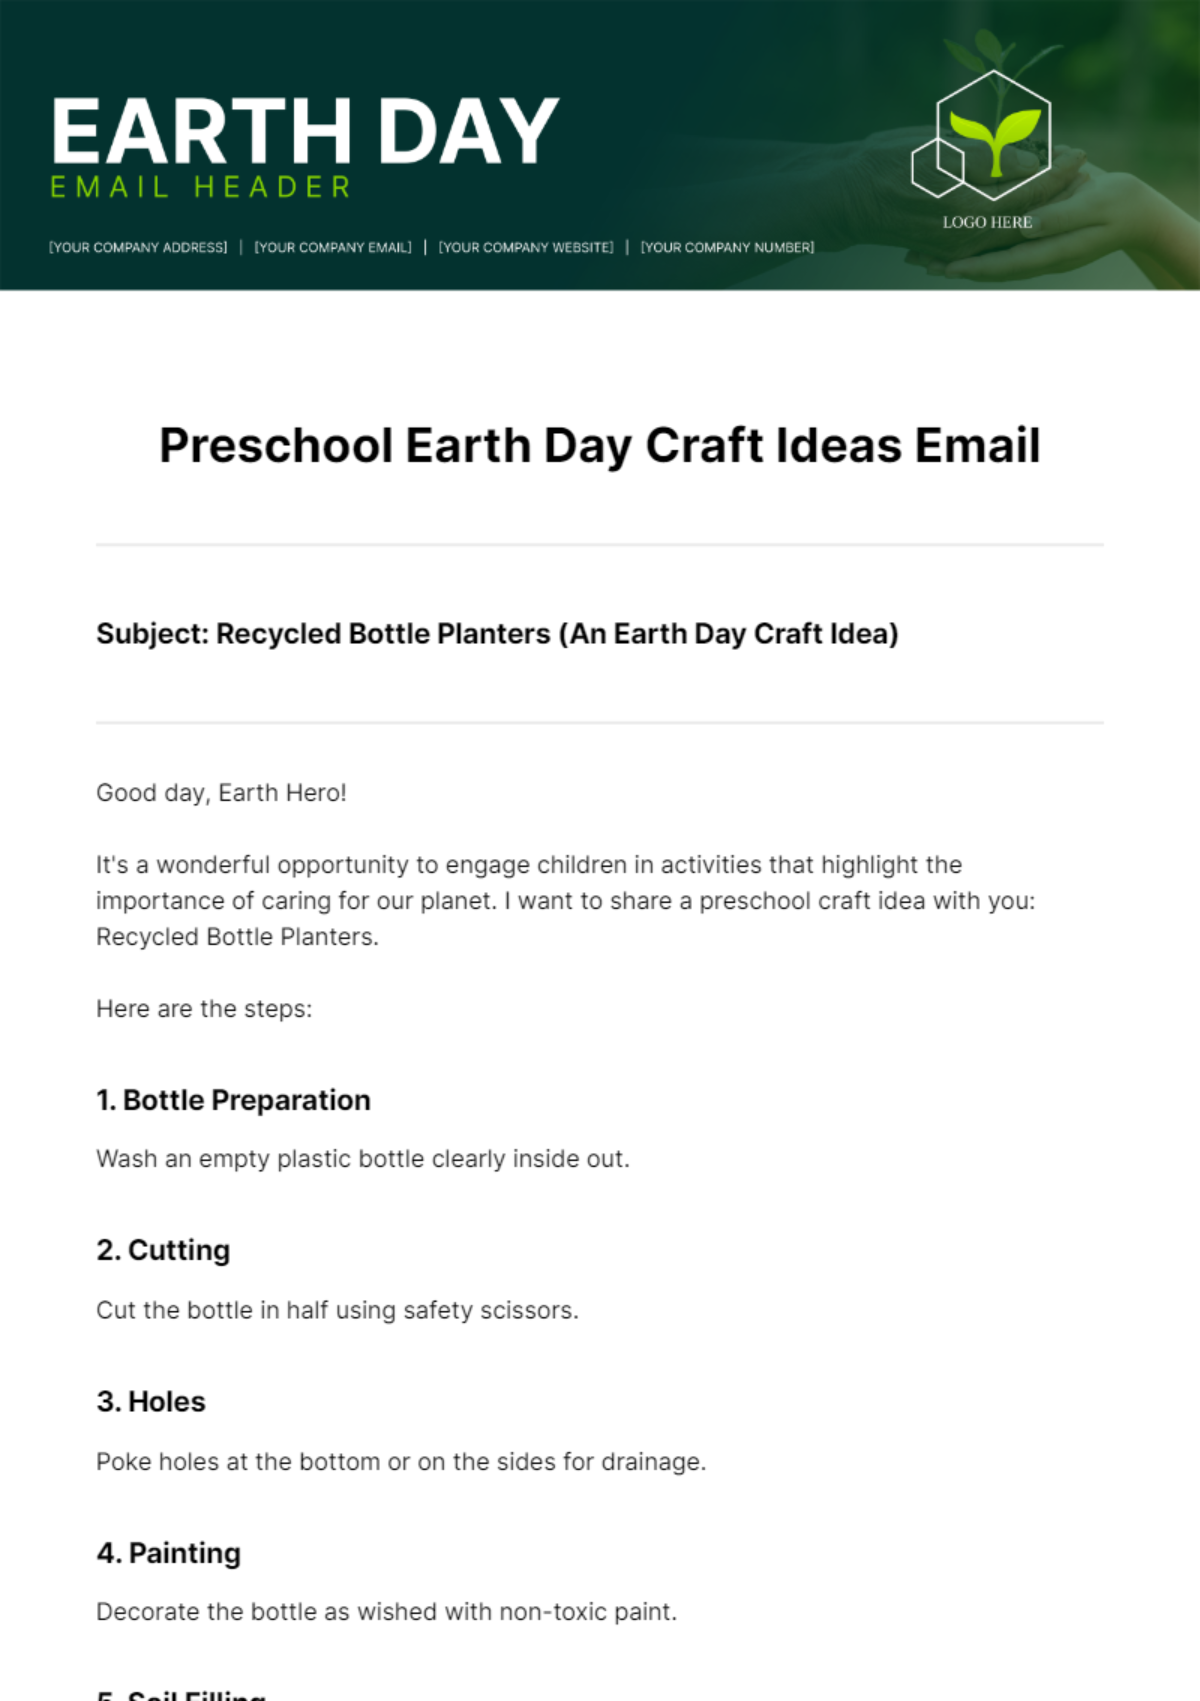 Preschool Earth Day Craft Ideas Email Template